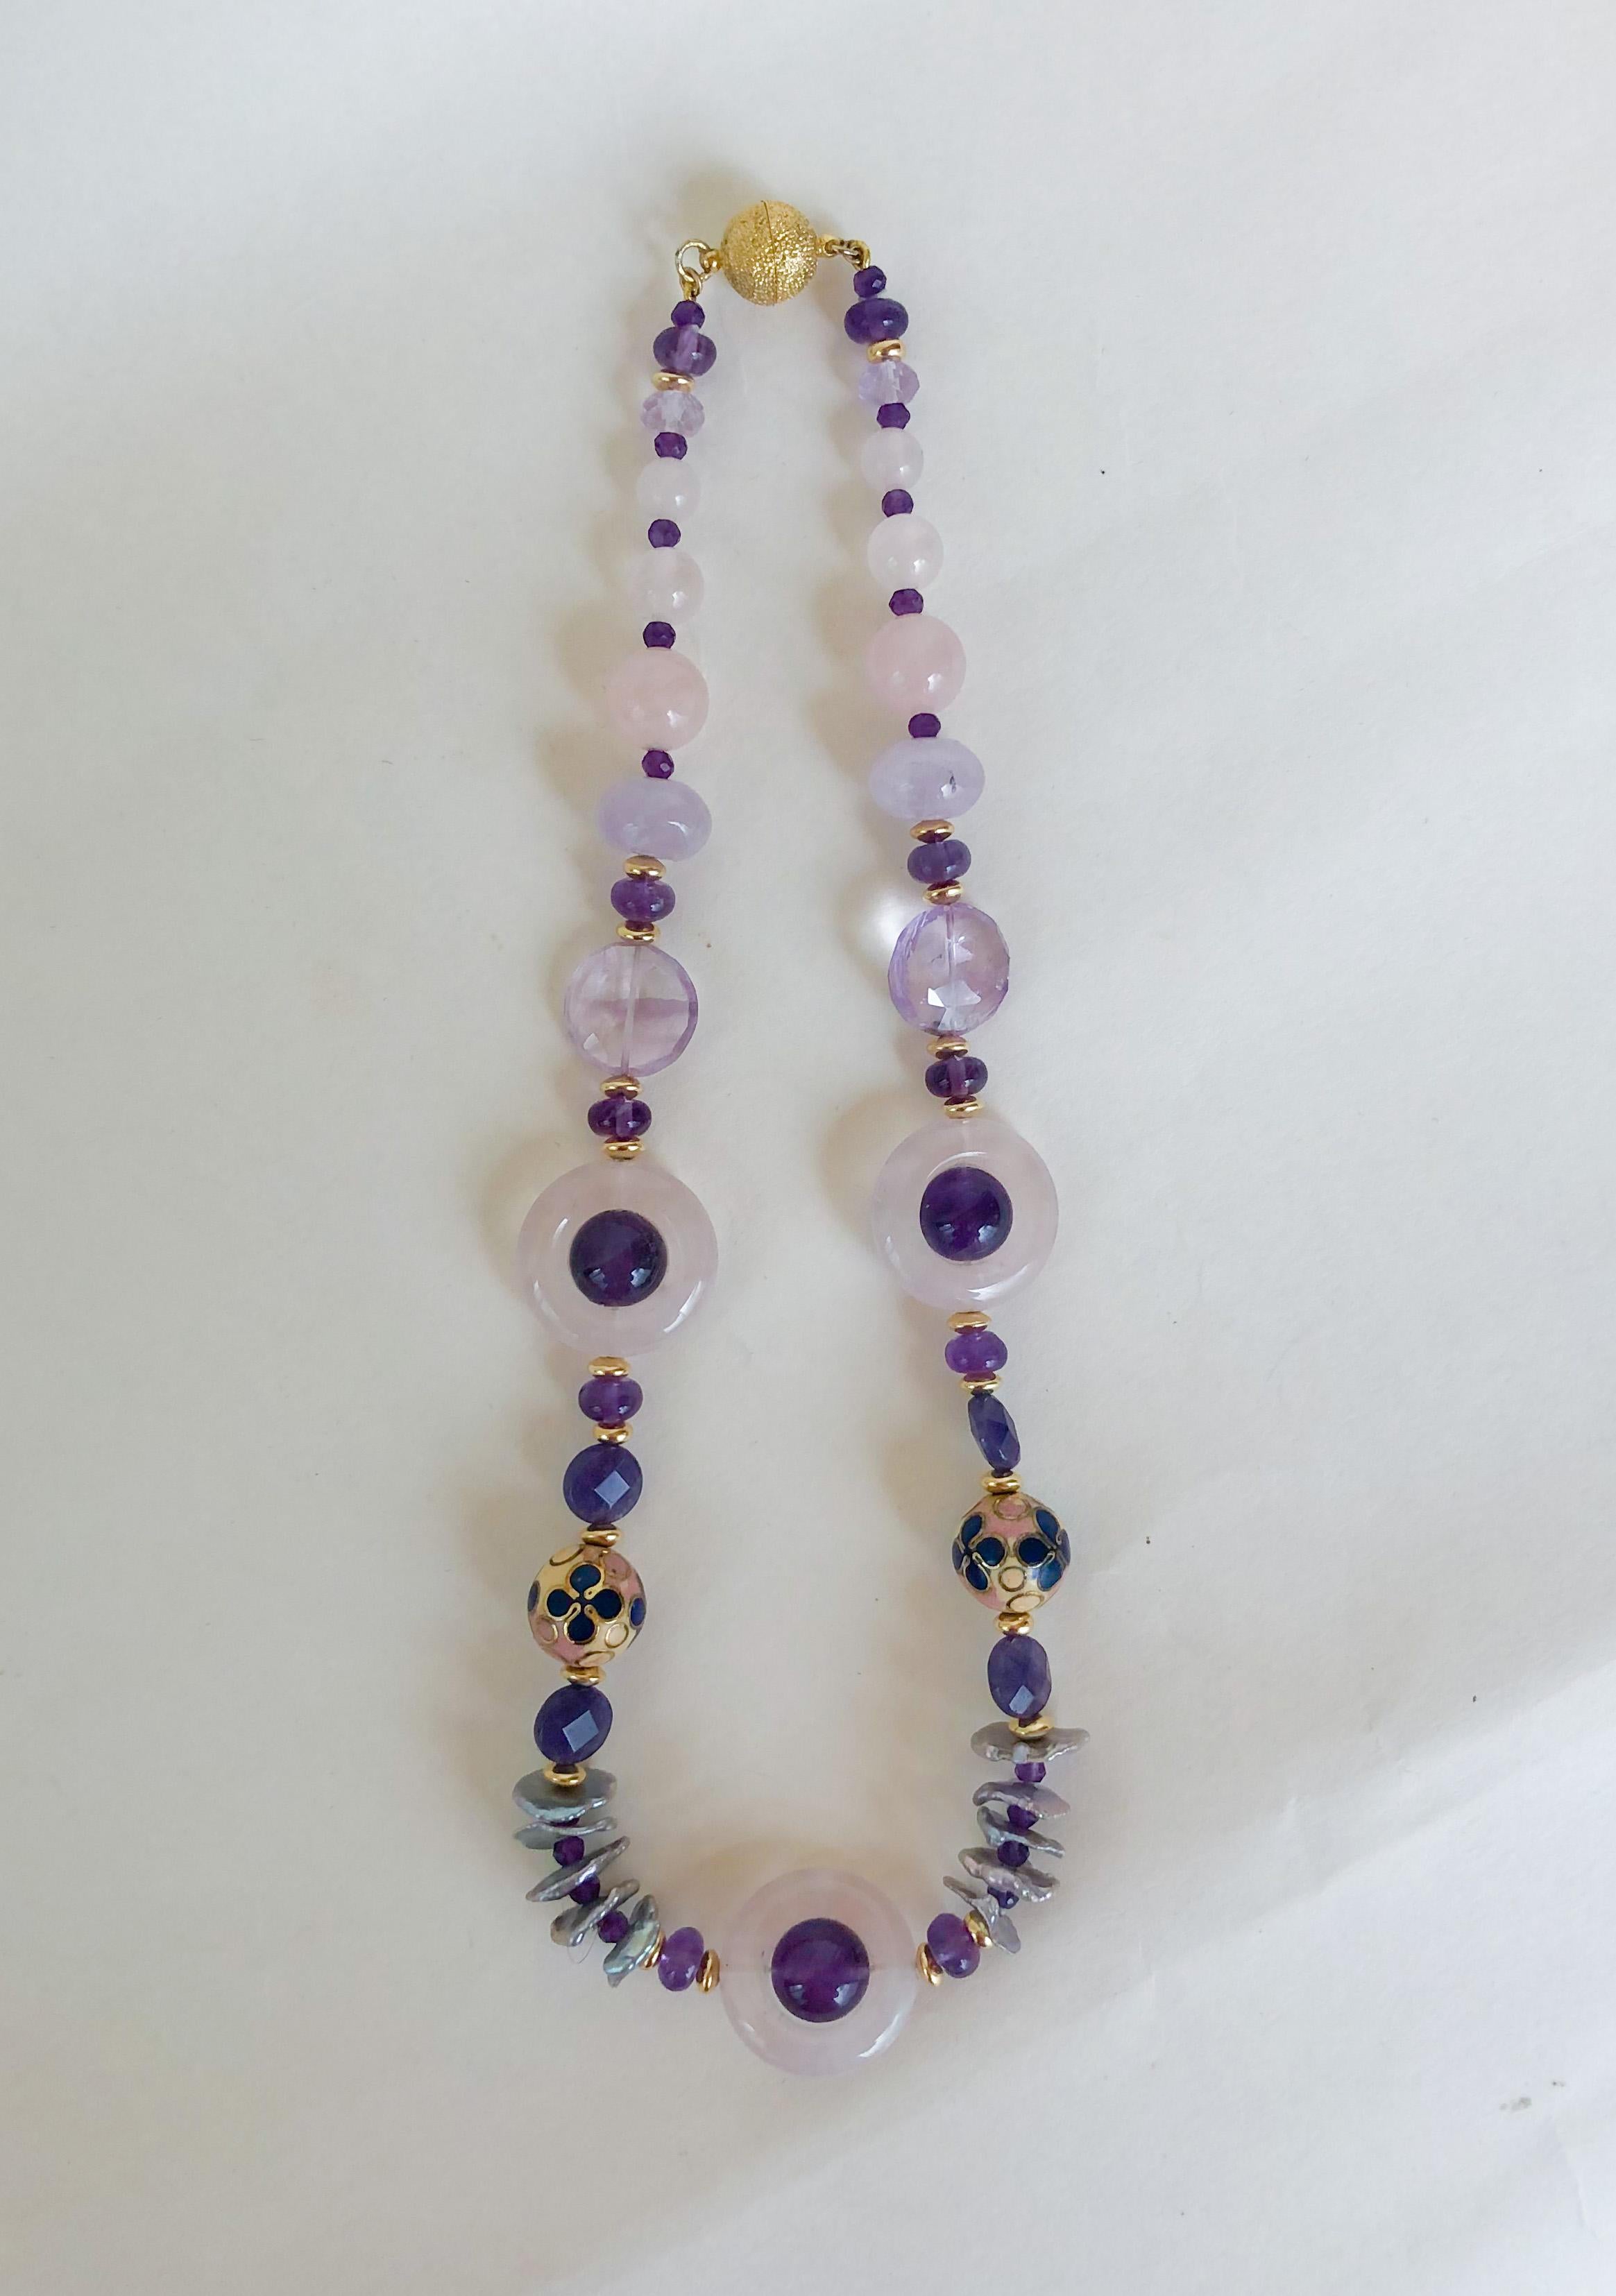 Brilliant Cut Marina J. Amethyst and Rose Quartz Necklace with Enamel Beads Pearls and Vermeil